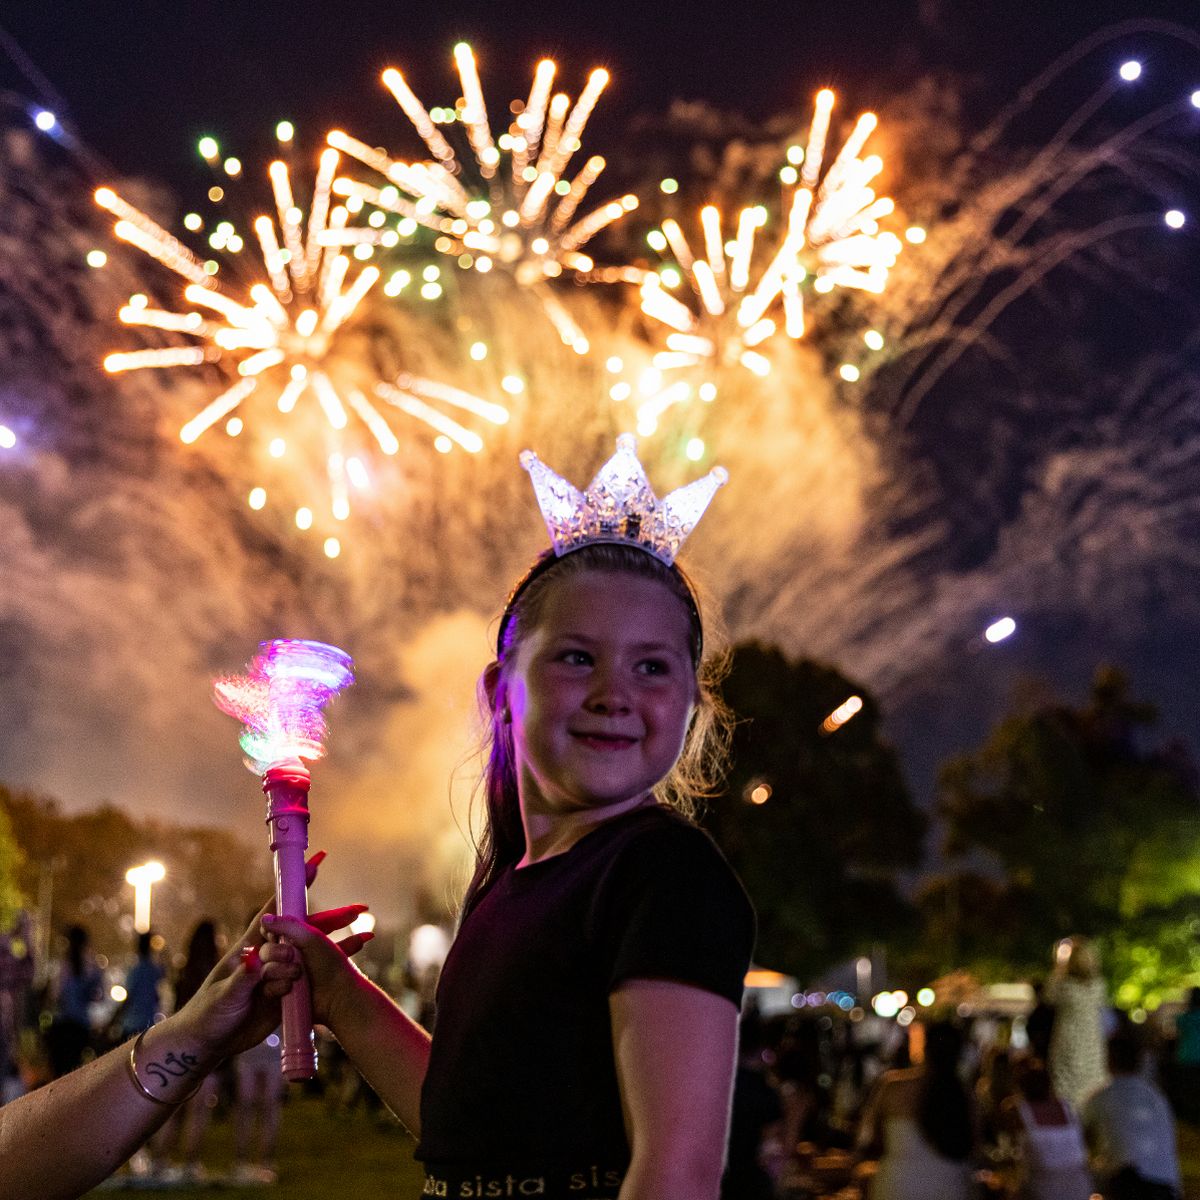 New Zealand welcomes the new year 2022 with fireworks